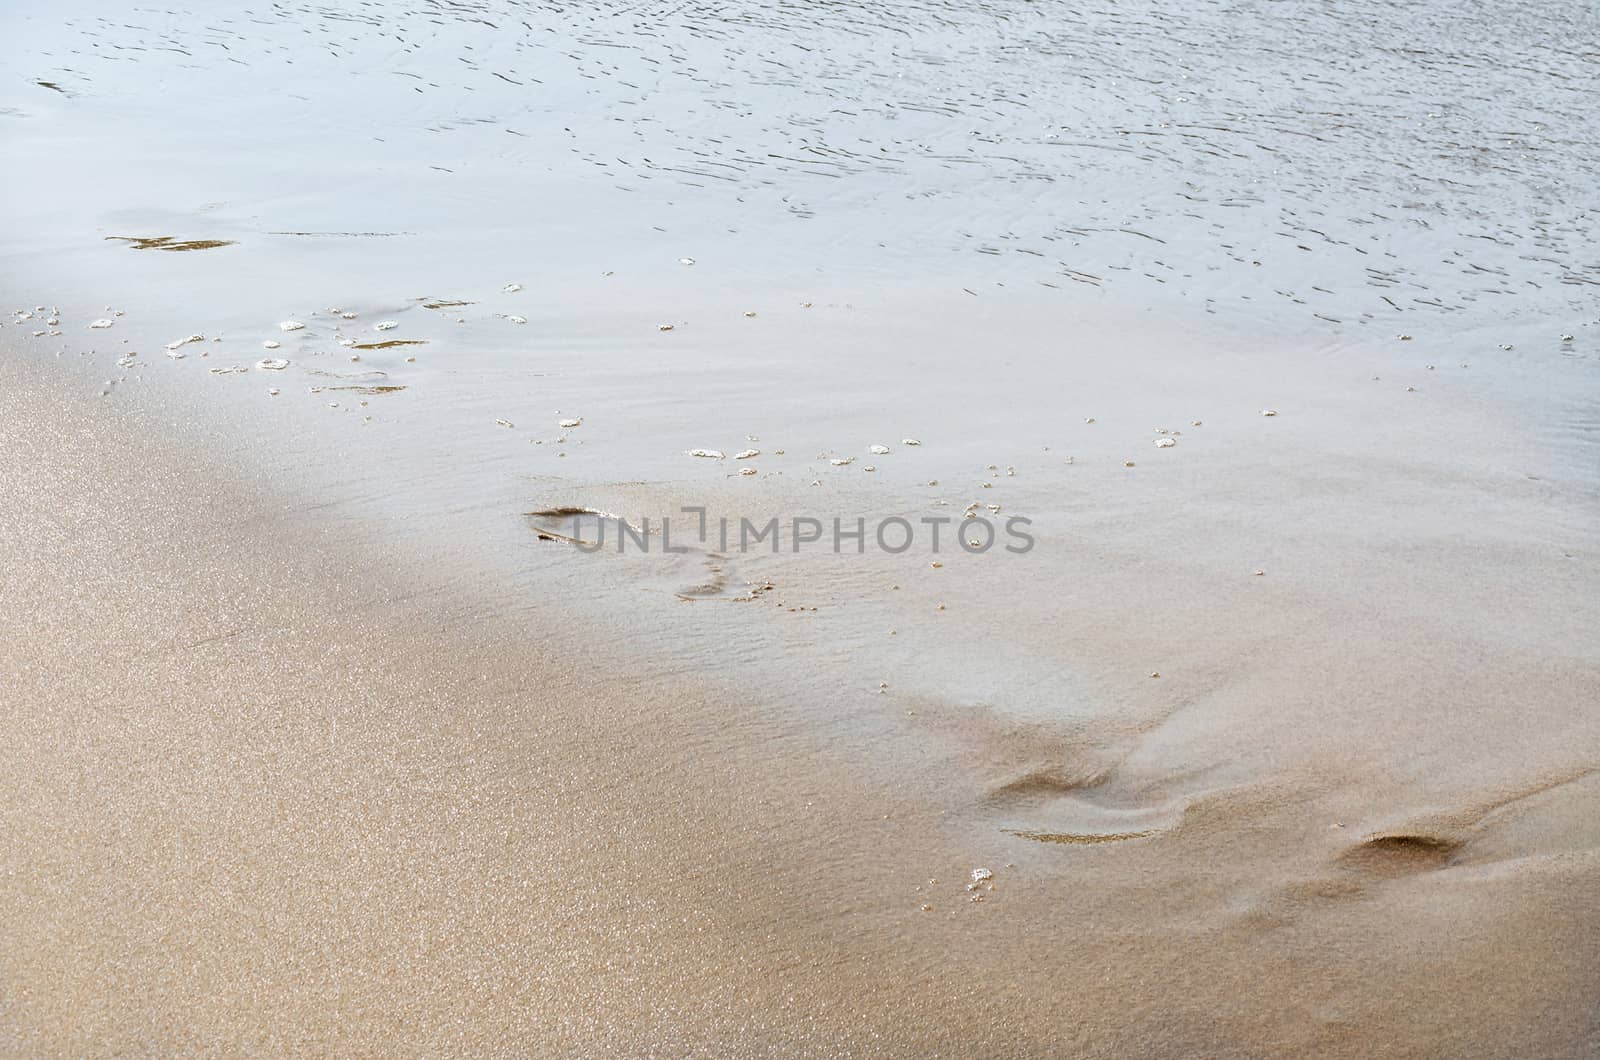 Footprints on the beach by JFsPic